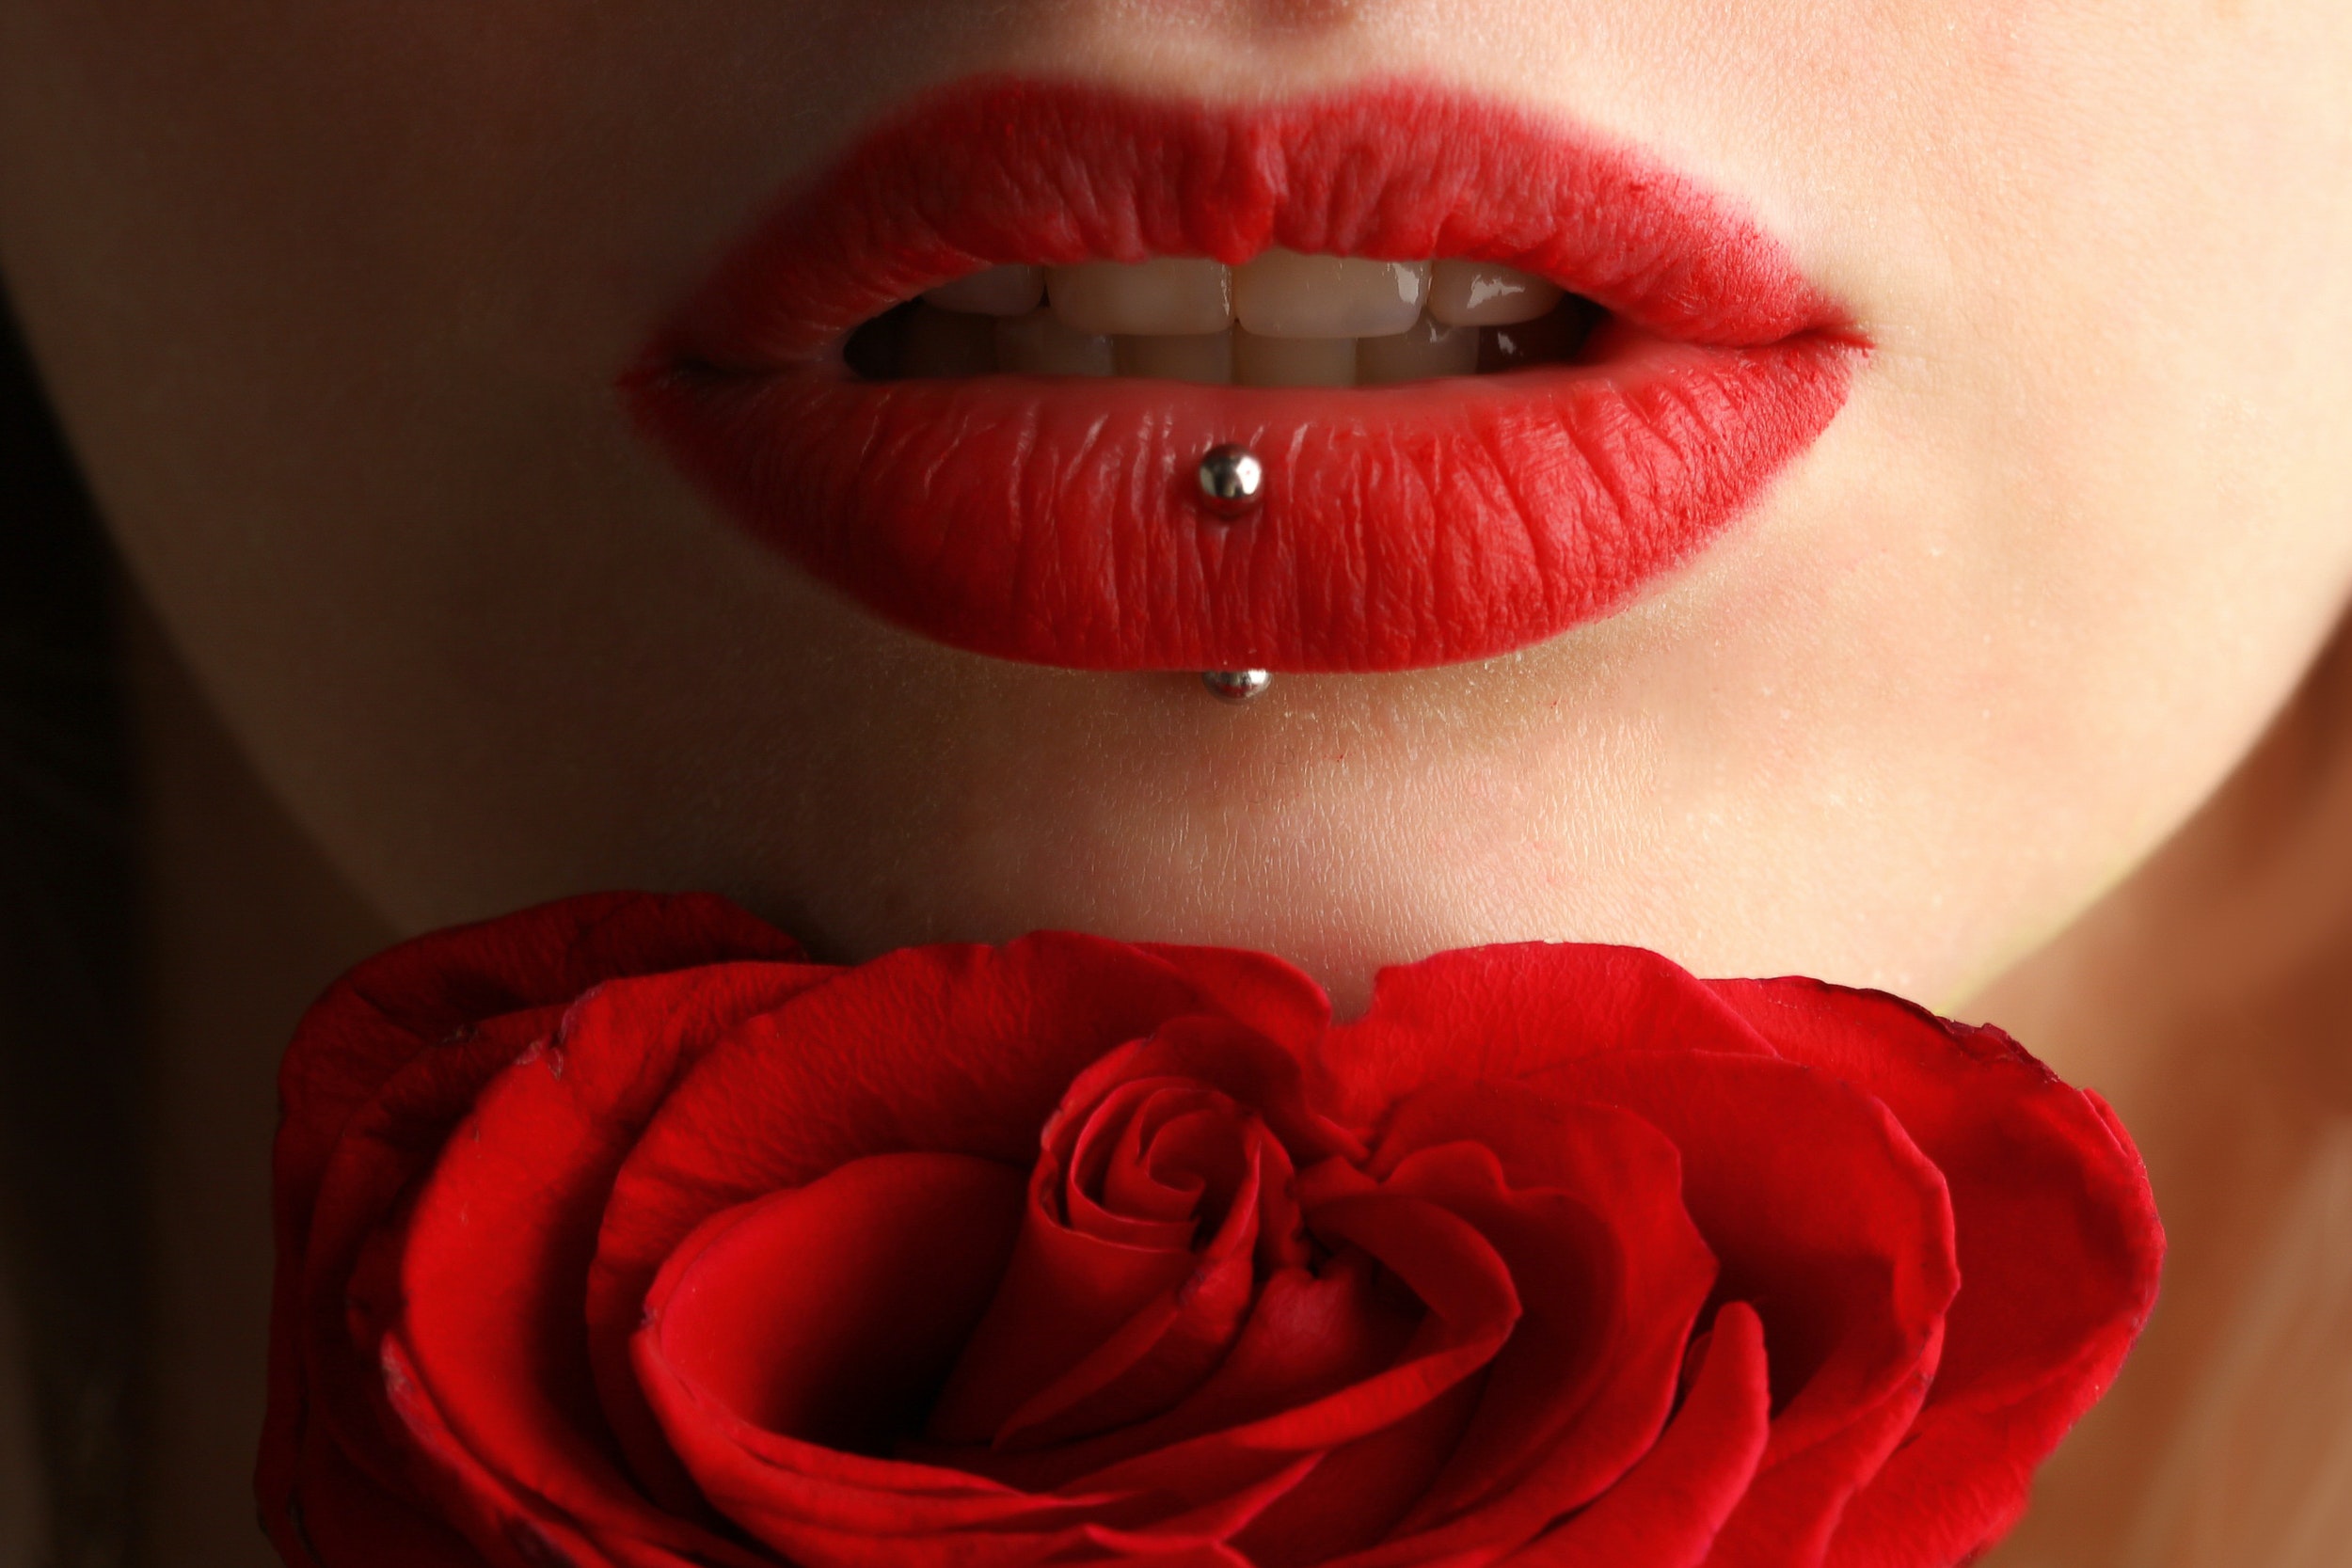 Red lips with a piercing and a red rose. │ Source: Pexels